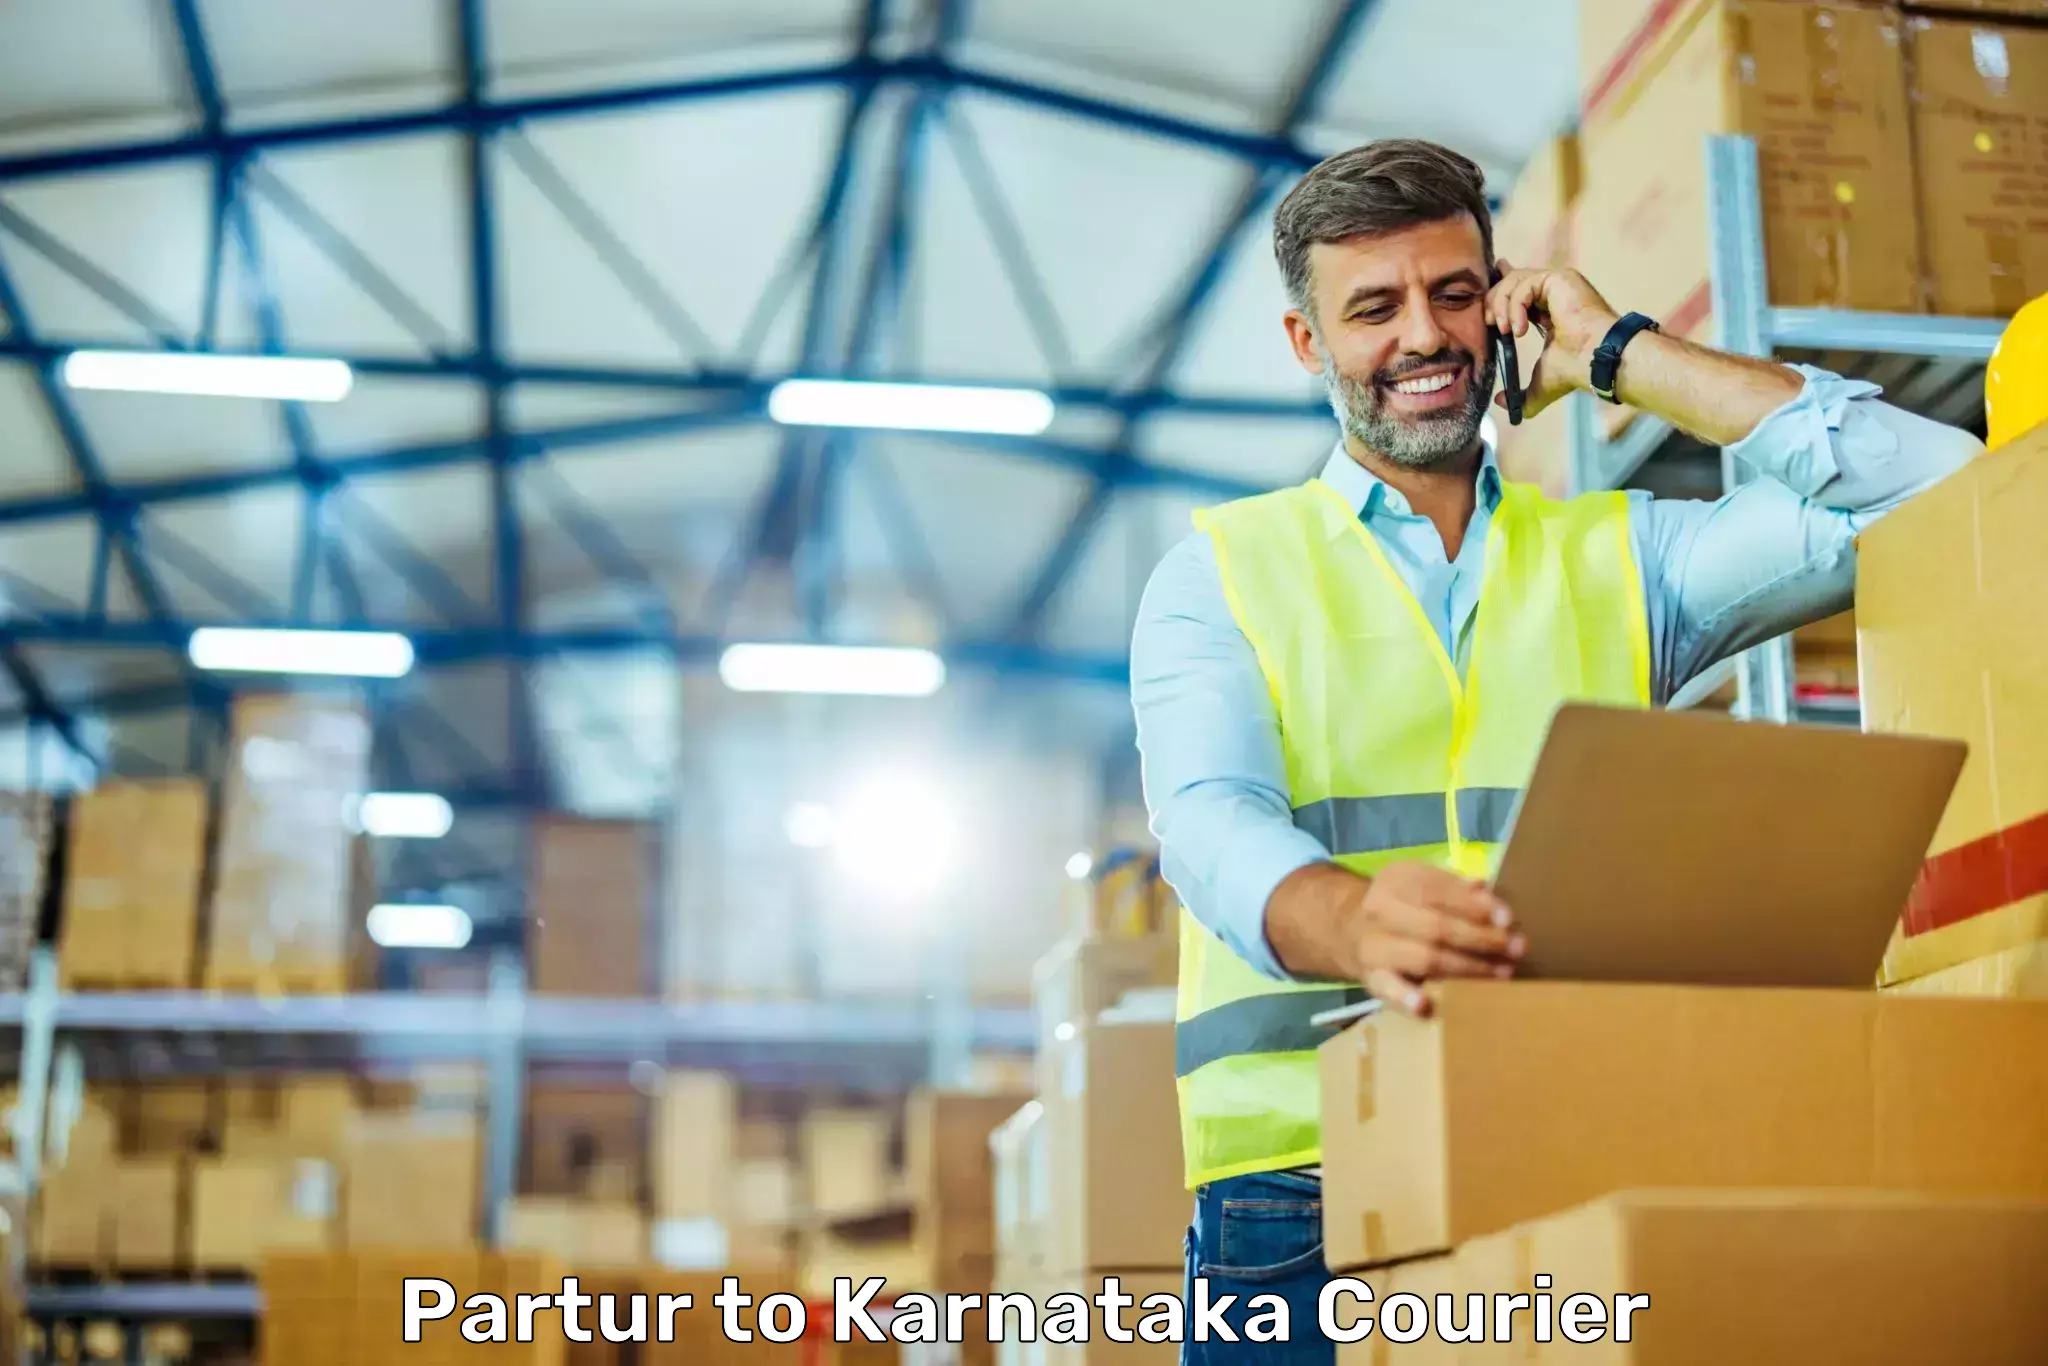 Cost-effective courier options Partur to Karnataka